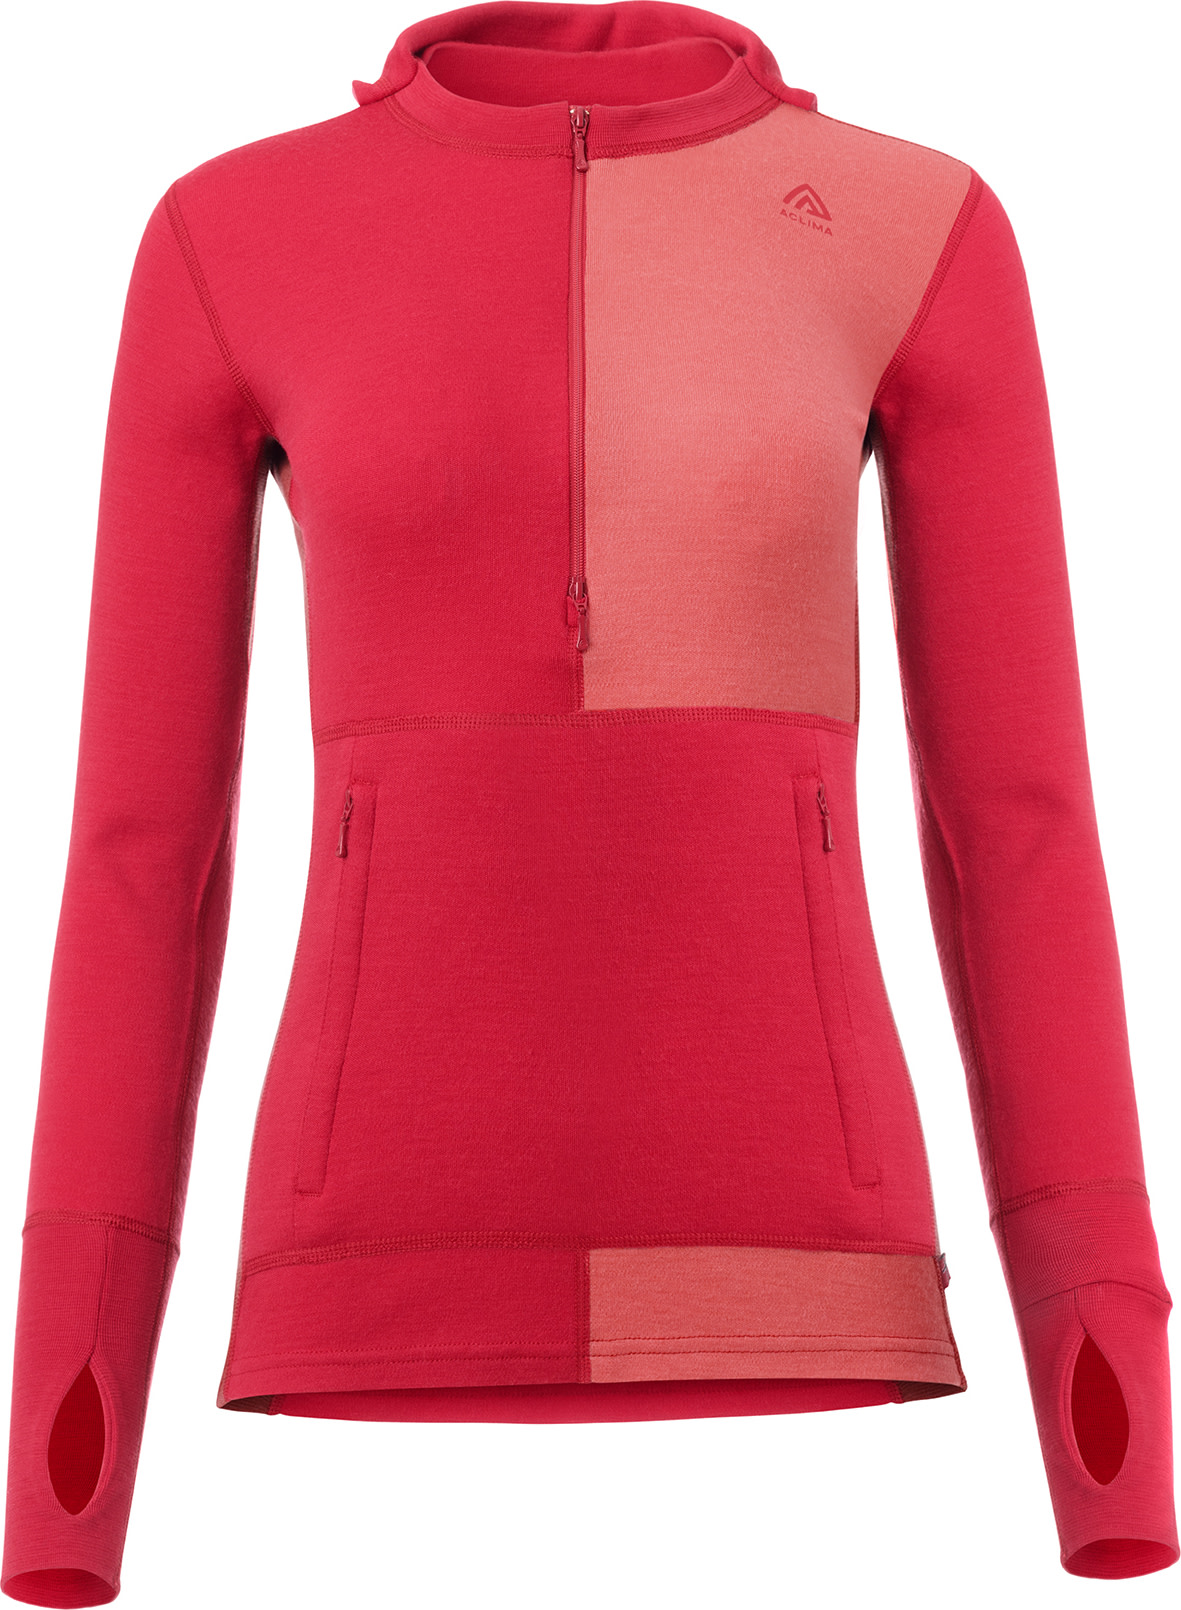 Aclima Women’s WarmWool Hoodsweater with Zip Jester Red/Spiced Coral/Spiced Apple